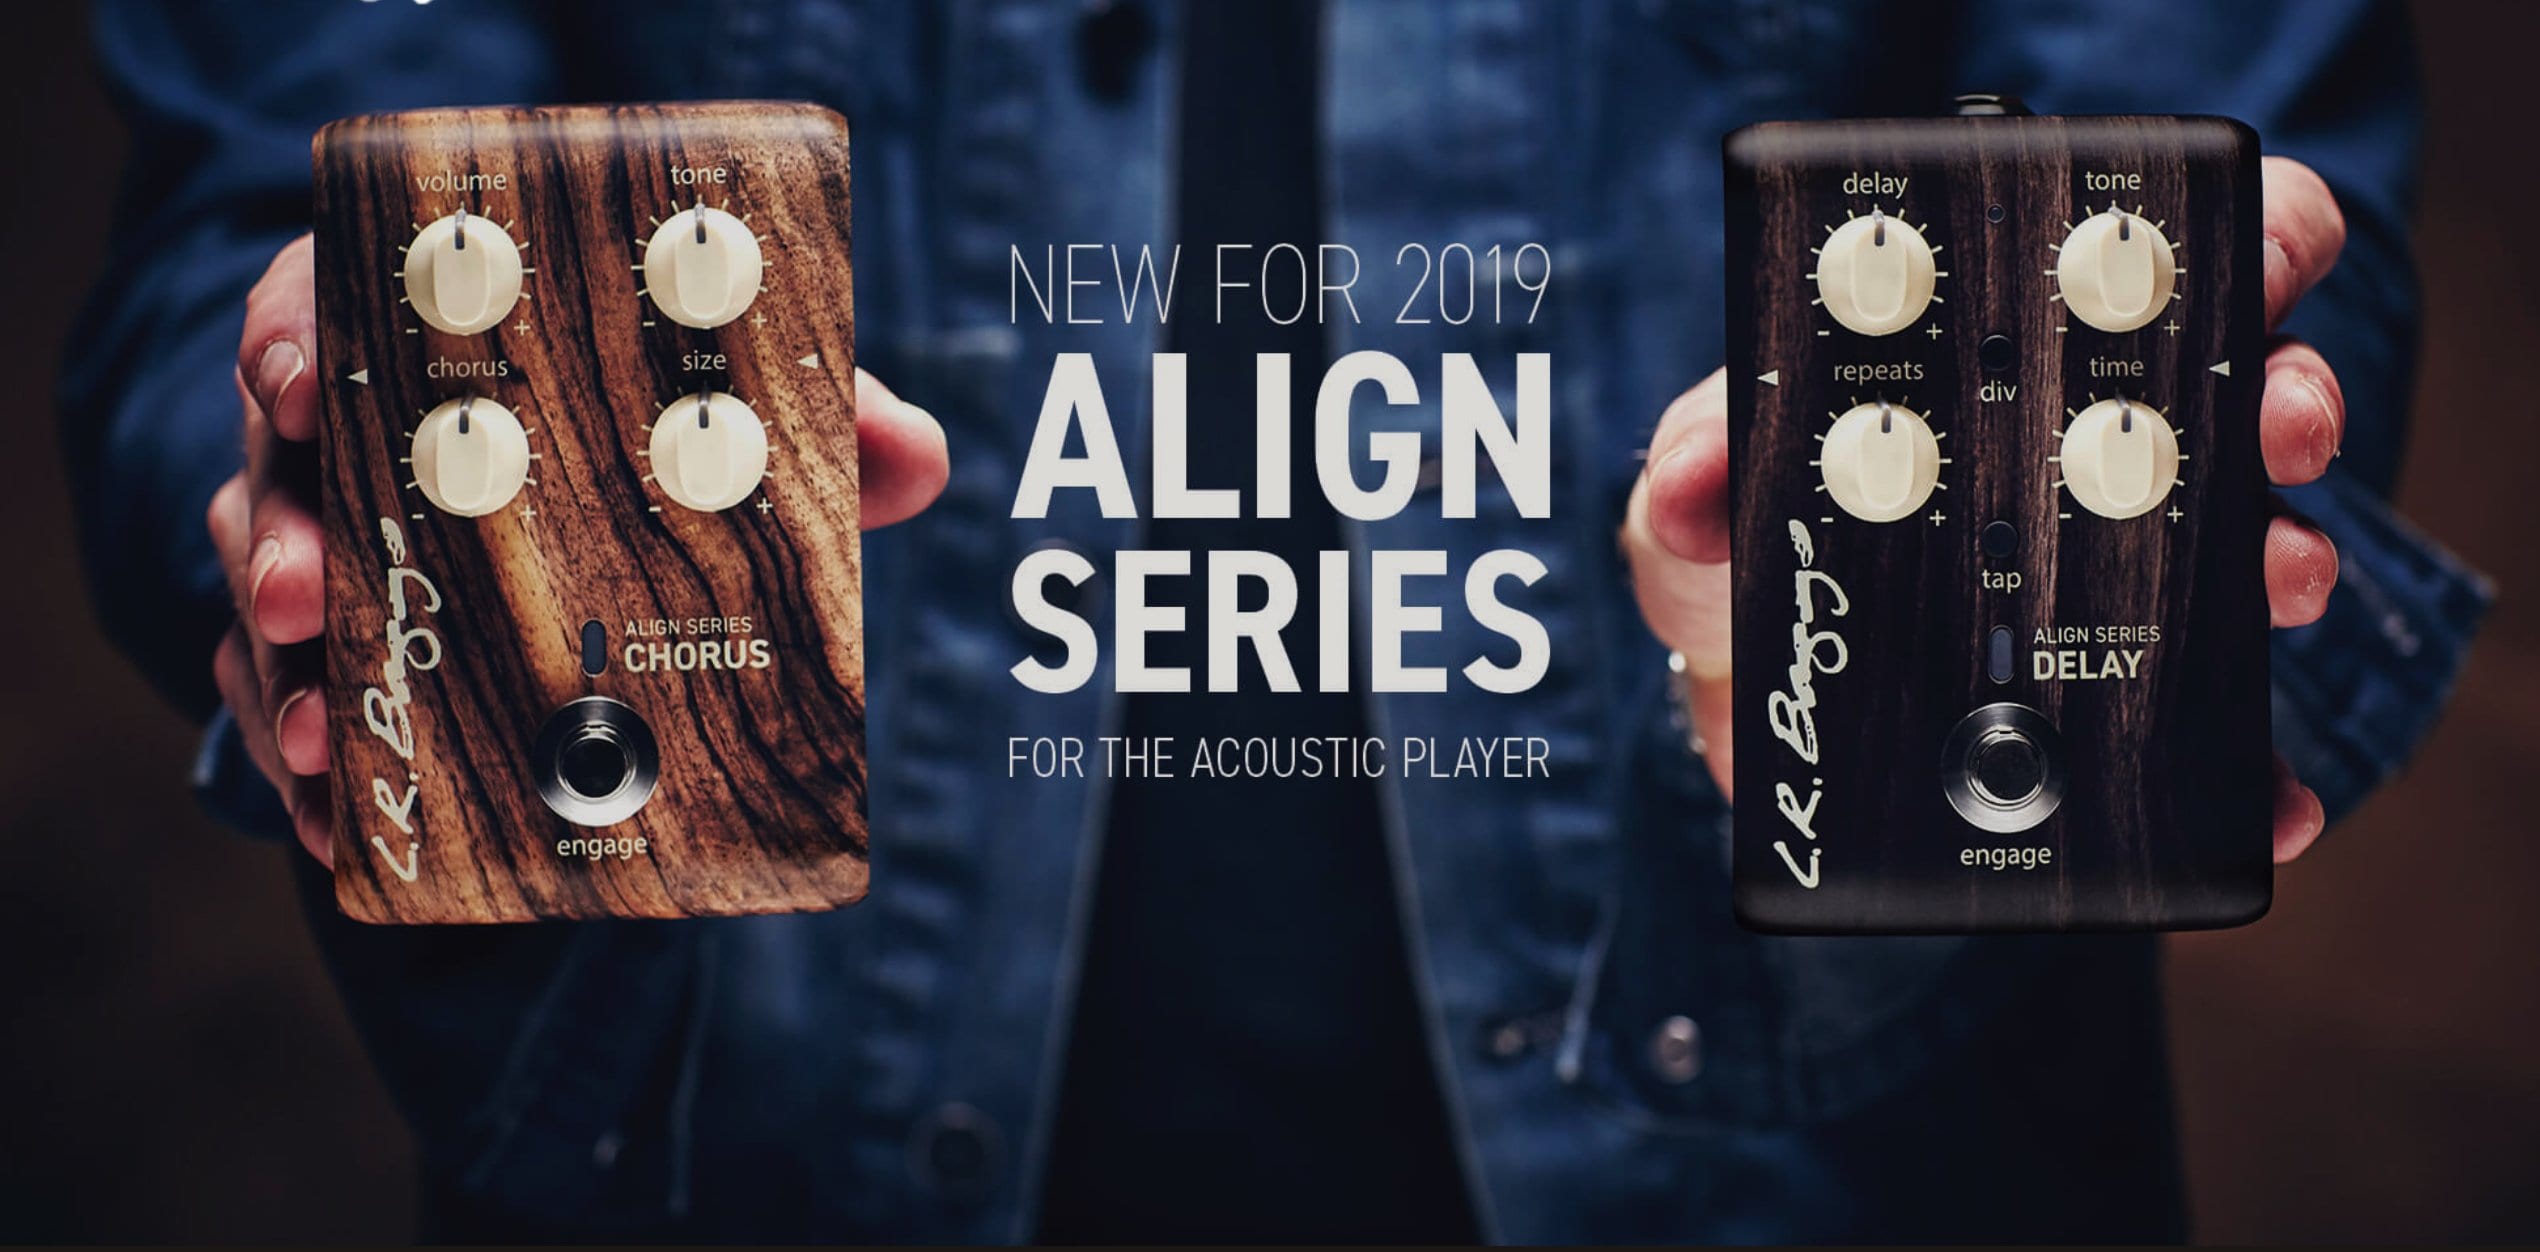 NAMM 2019- LR Baggs Align Series adds new chorus and delay for 2019